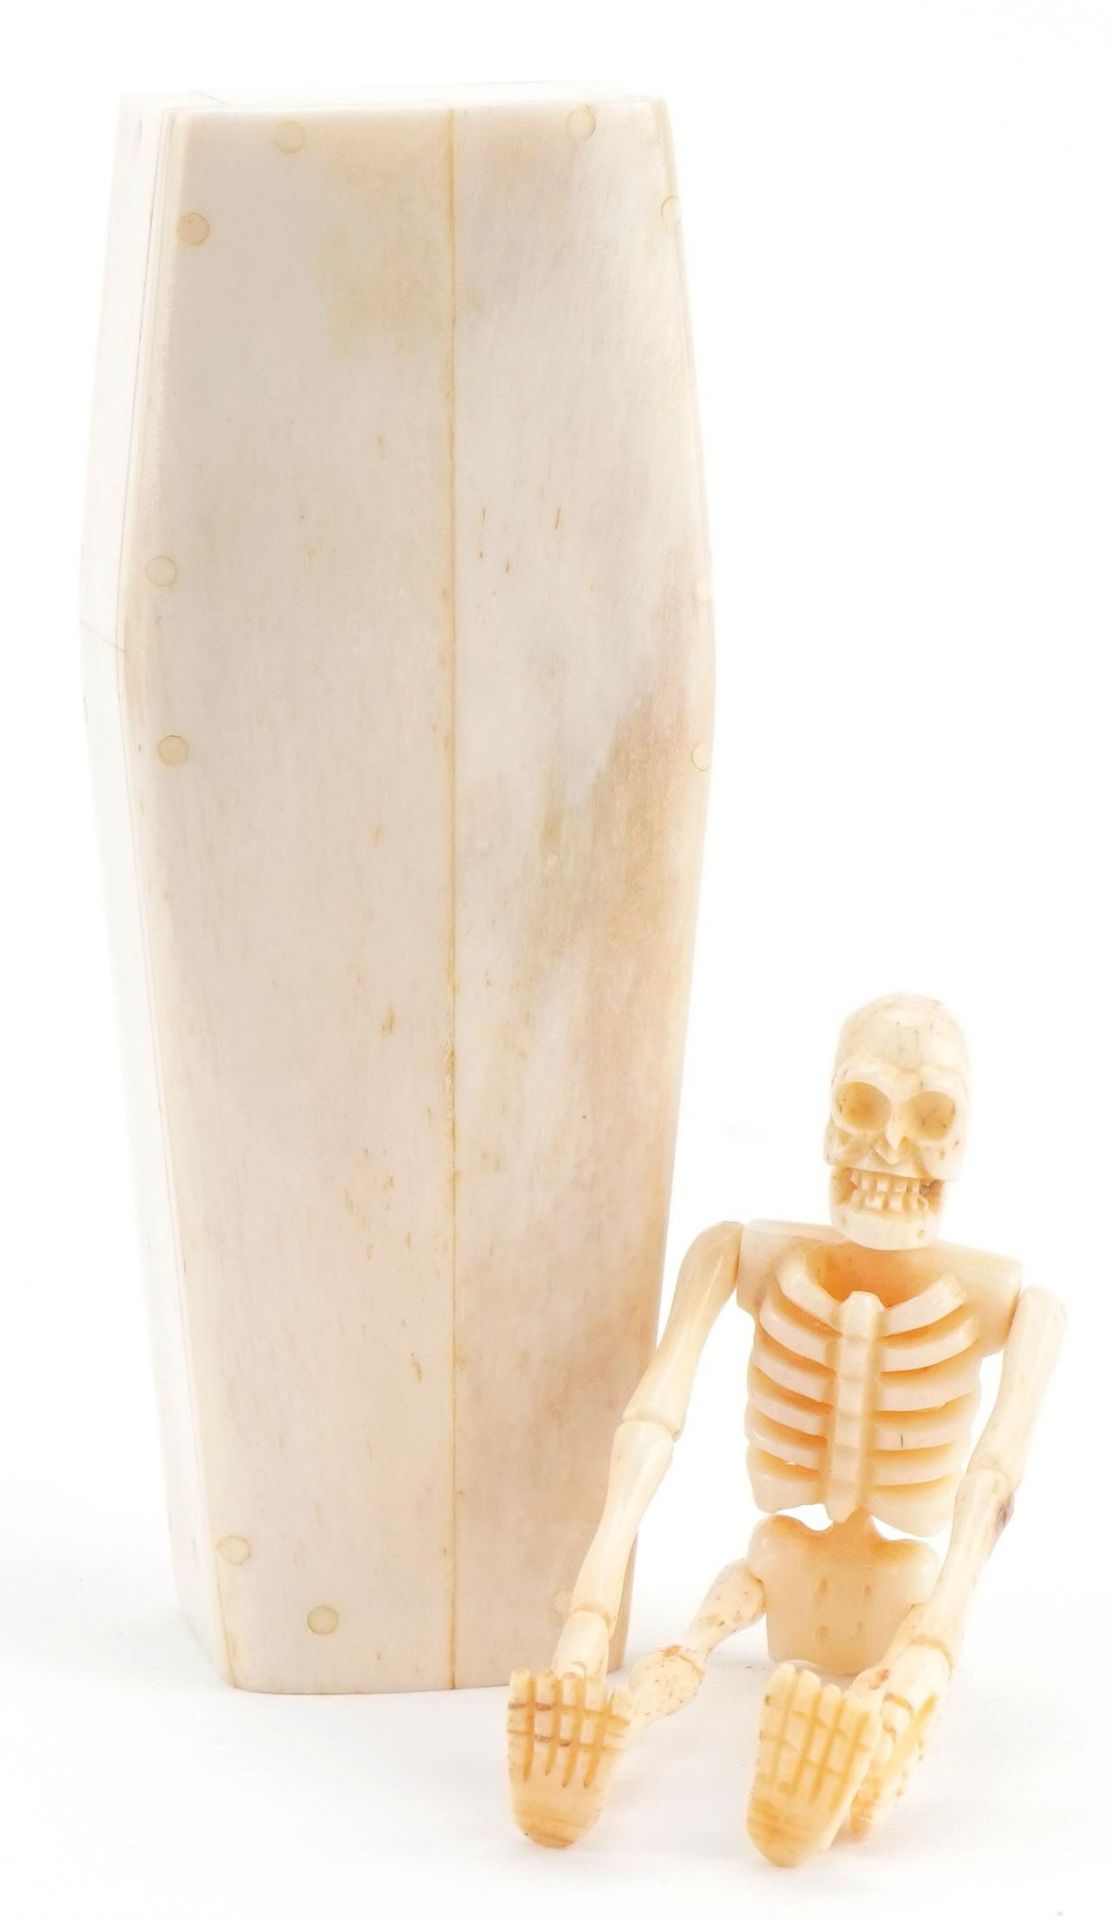 Novelty carved bone articulated skeleton housed in a sectional bone coffin, the largest 11.5cm in